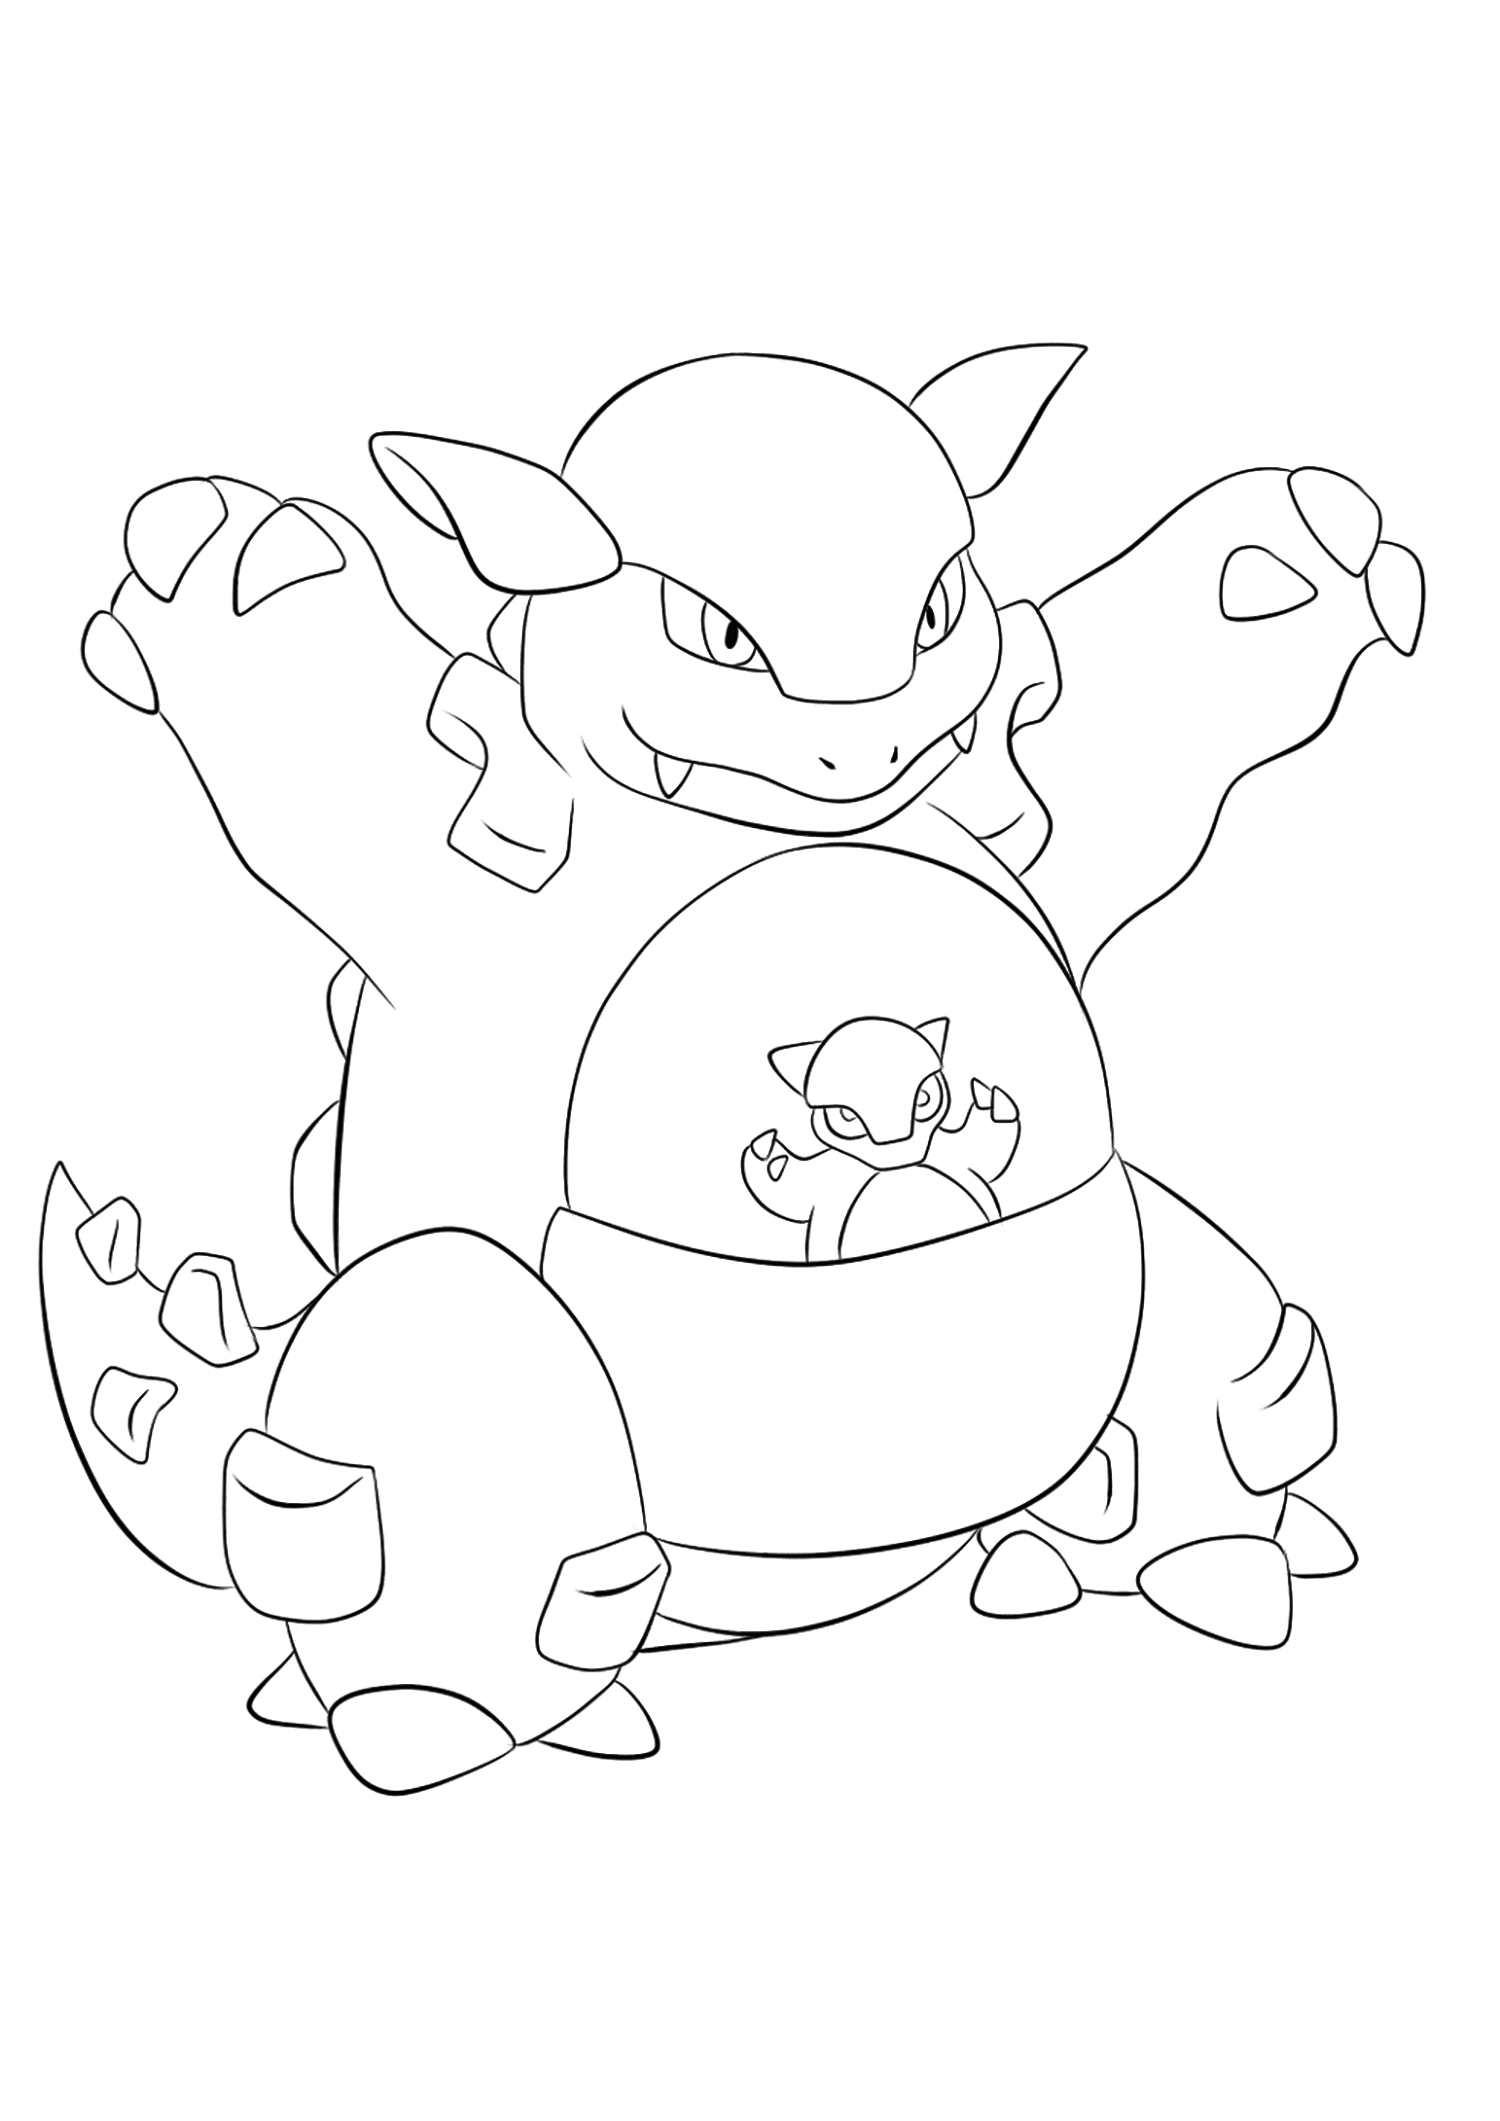 Kangaskhan (No.115). Kangaskhan Coloring page, Generation I Pokemon of type NormalOriginal image credit: Pokemon linearts by Lilly Gerbil on Deviantart.Permission:  All rights reserved © Pokemon company and Ken Sugimori.